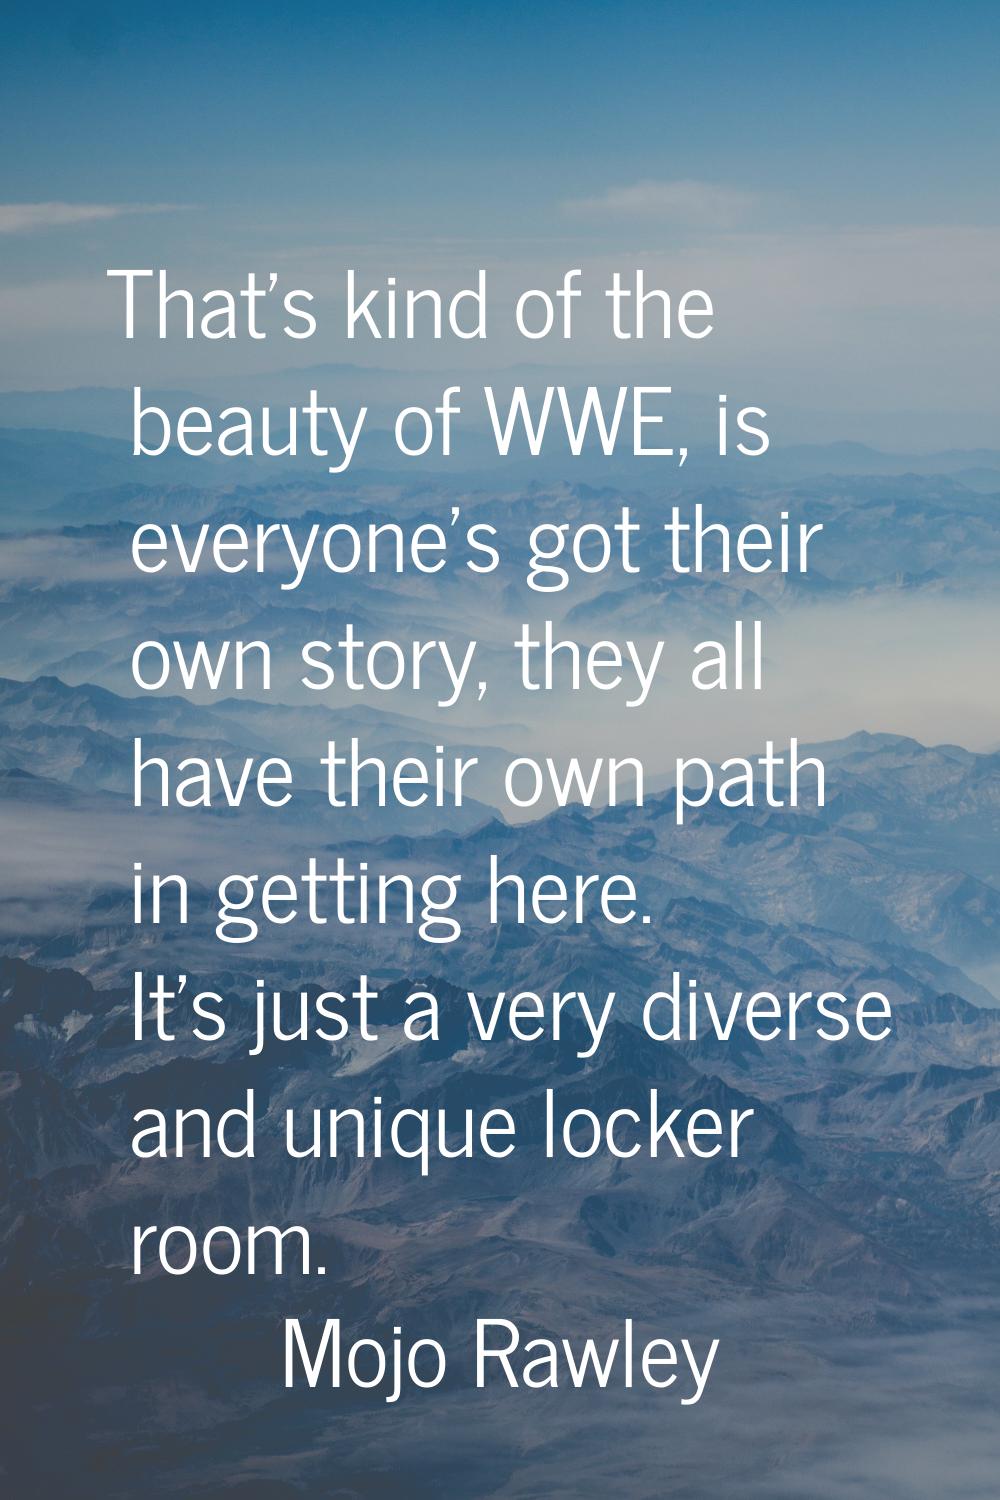 That's kind of the beauty of WWE, is everyone's got their own story, they all have their own path i